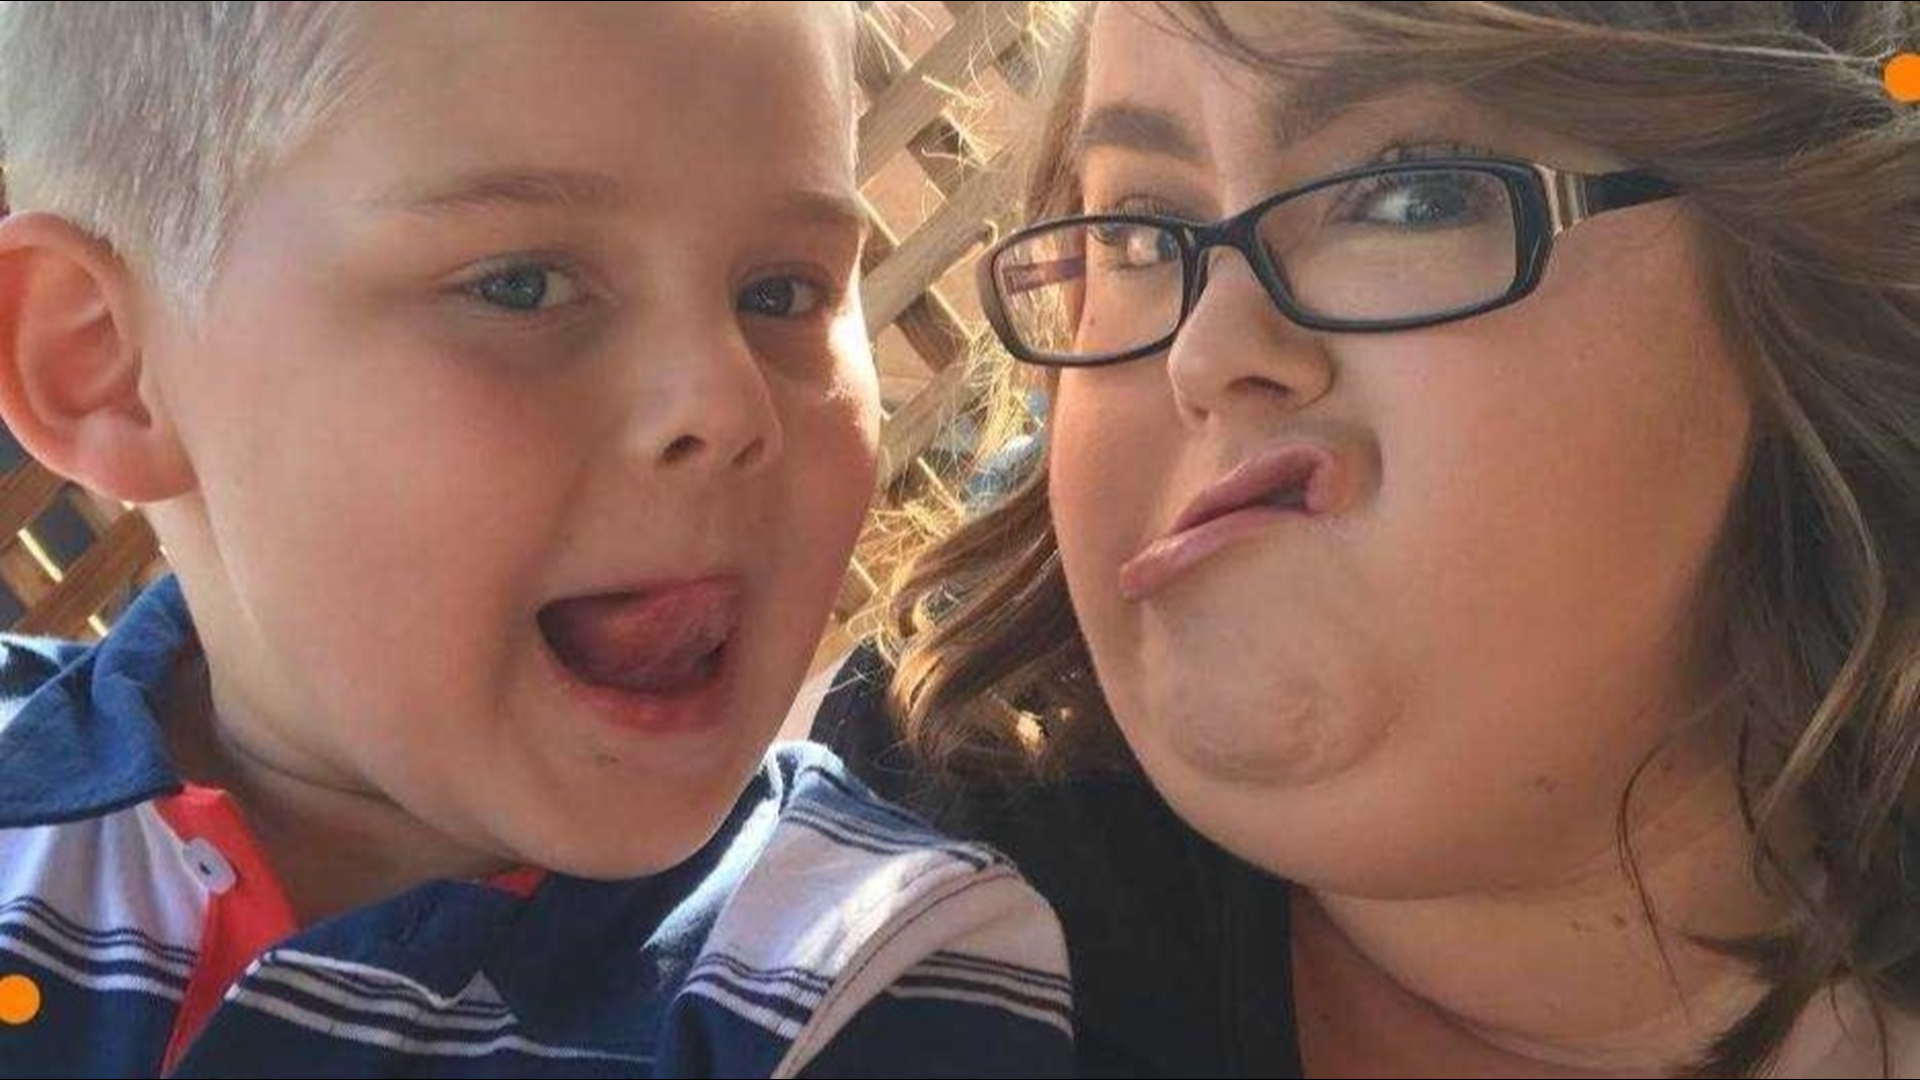 Jennifer Vegtel and her son Logan suffered fatal injuries in the four-vehicle crash, DPS said. Logan's grandmother, Angela Vegtel expresses the family's suffering and what Logan was like.